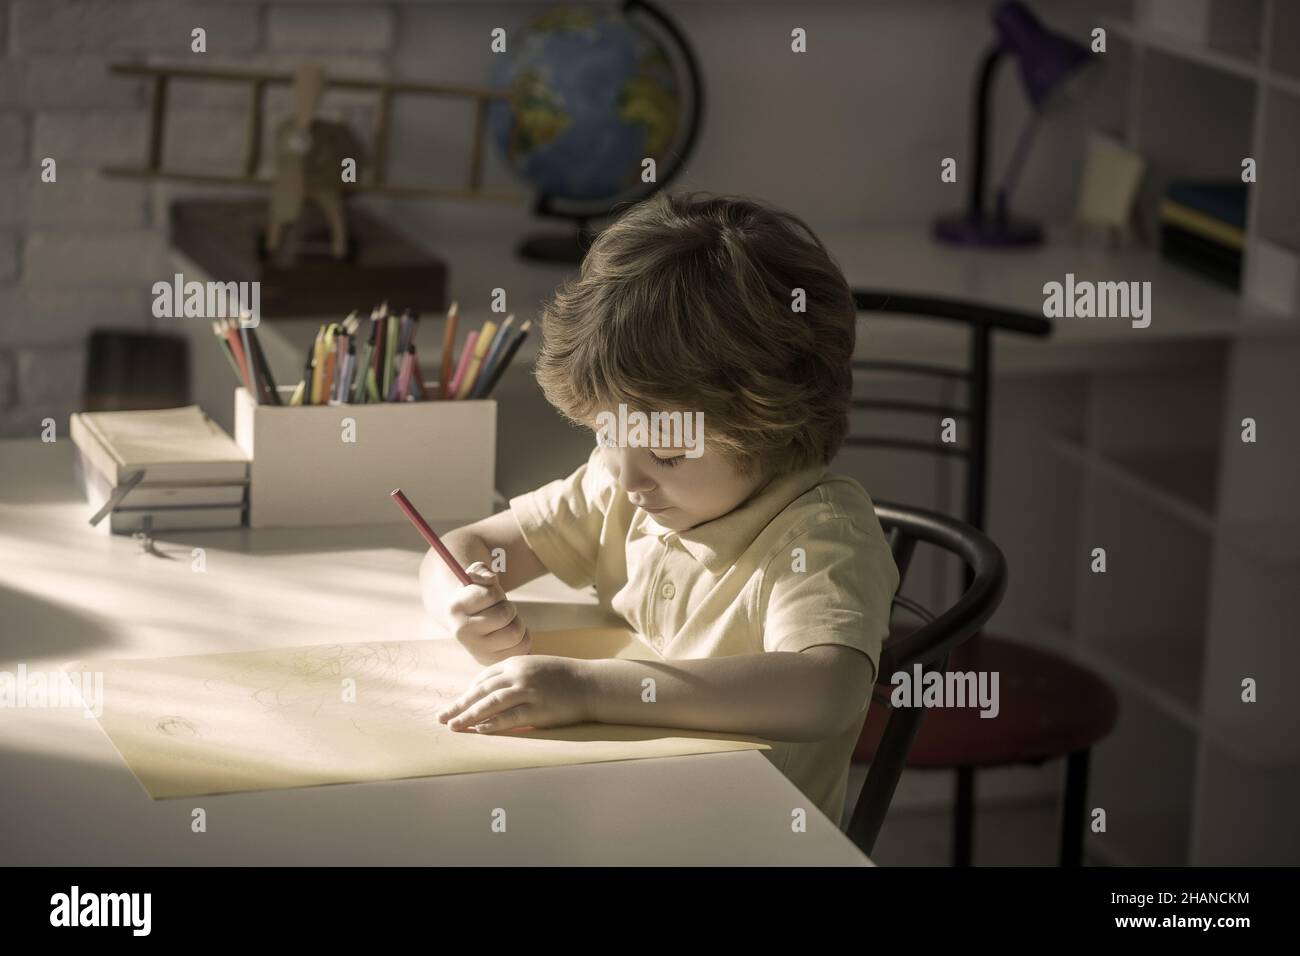 Little boy drawing in room, education and daycare. Stock Photo